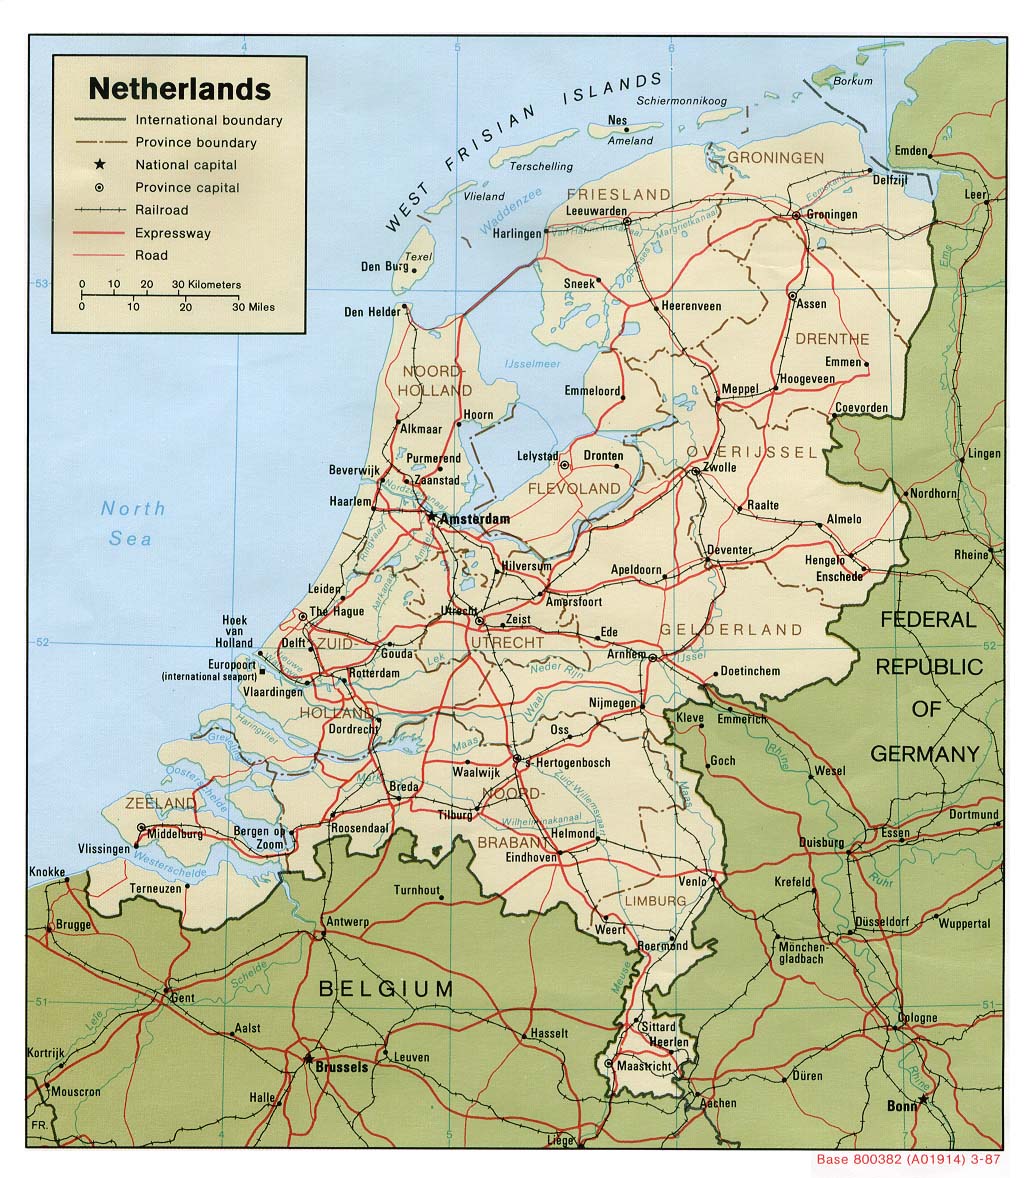 Holland, also called The Netherlands, is bordered by the North Sea (to the